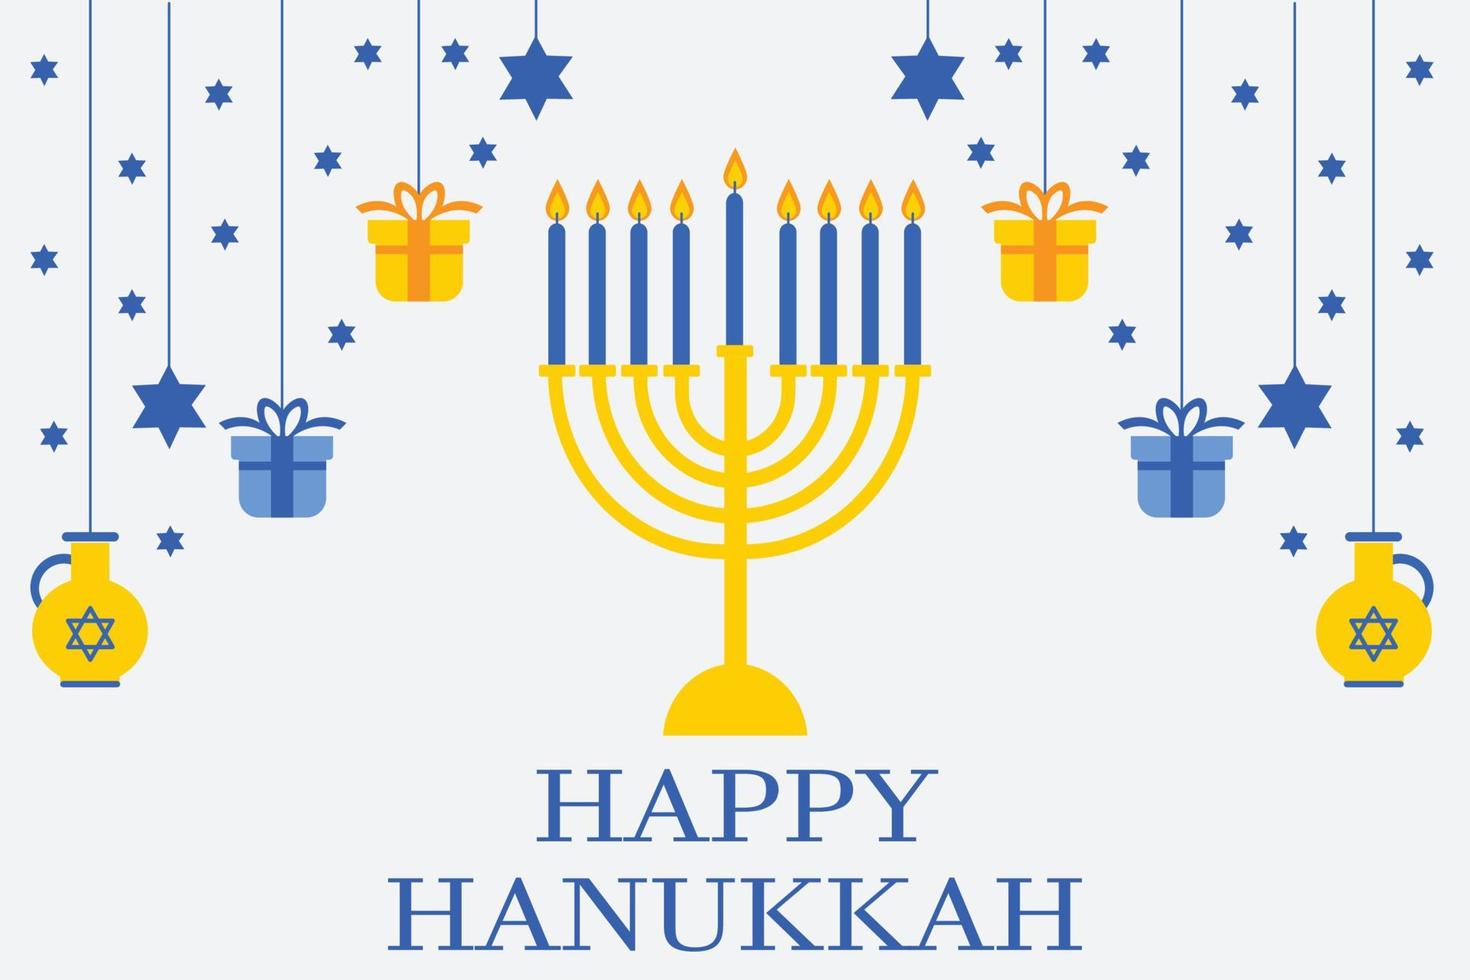 Hanukkah background with holiday candles, dreidels, Hebrew letters and David stars. Modern paper cut design for Jewish Festival of light. Vector illustration with place for your text